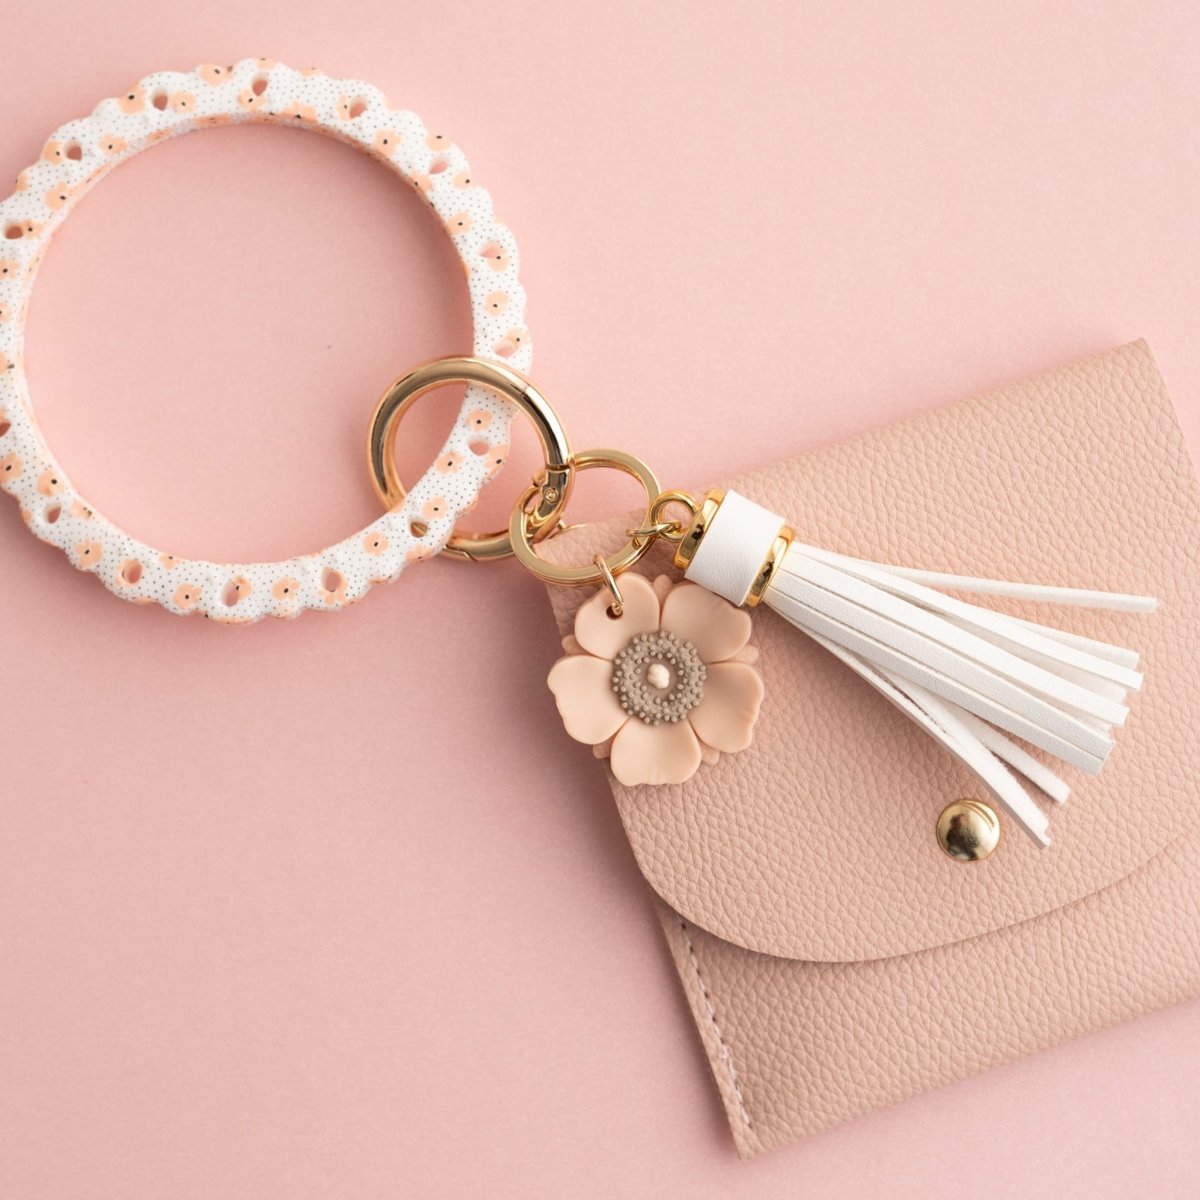 Shop the Image Perfectly Peachy Infinity Wristlet from Cara & Co Craft Supply